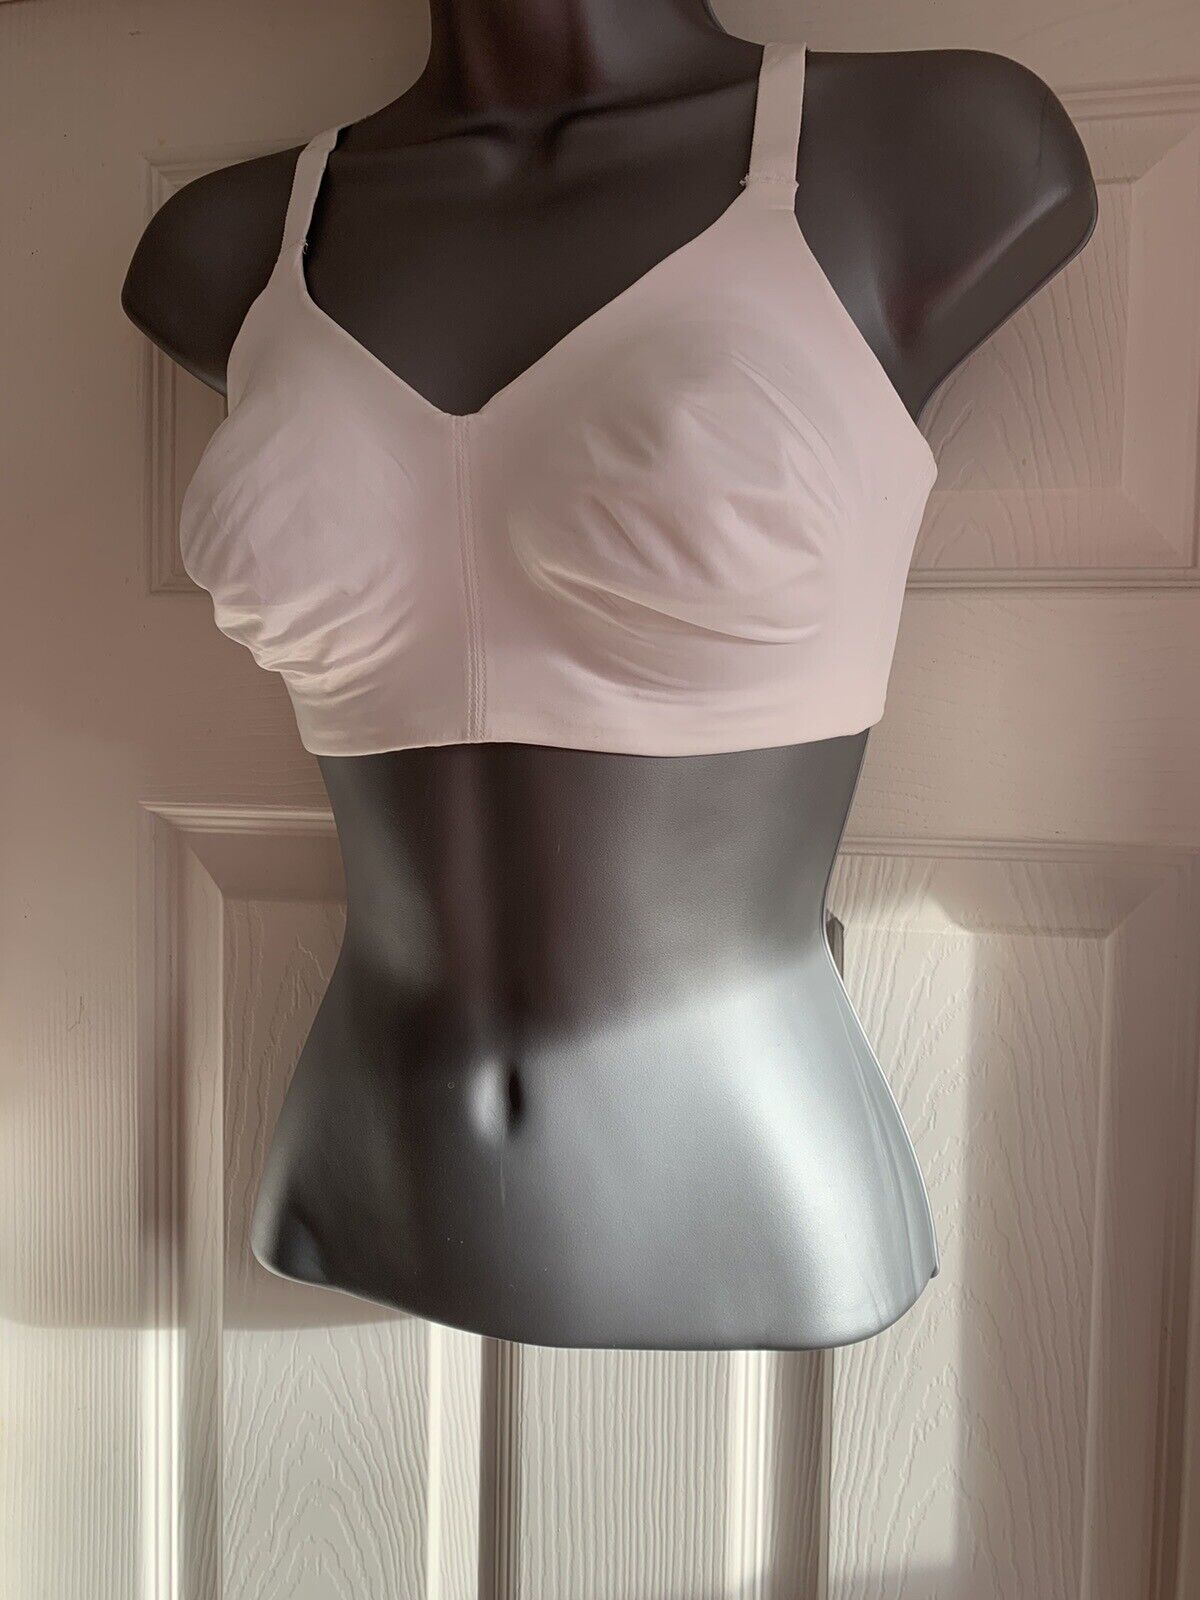 EX M&amp;S White Flexifit Non-Wired Full Cup Bra Sizes 32F, 34F, 36F SECONDS